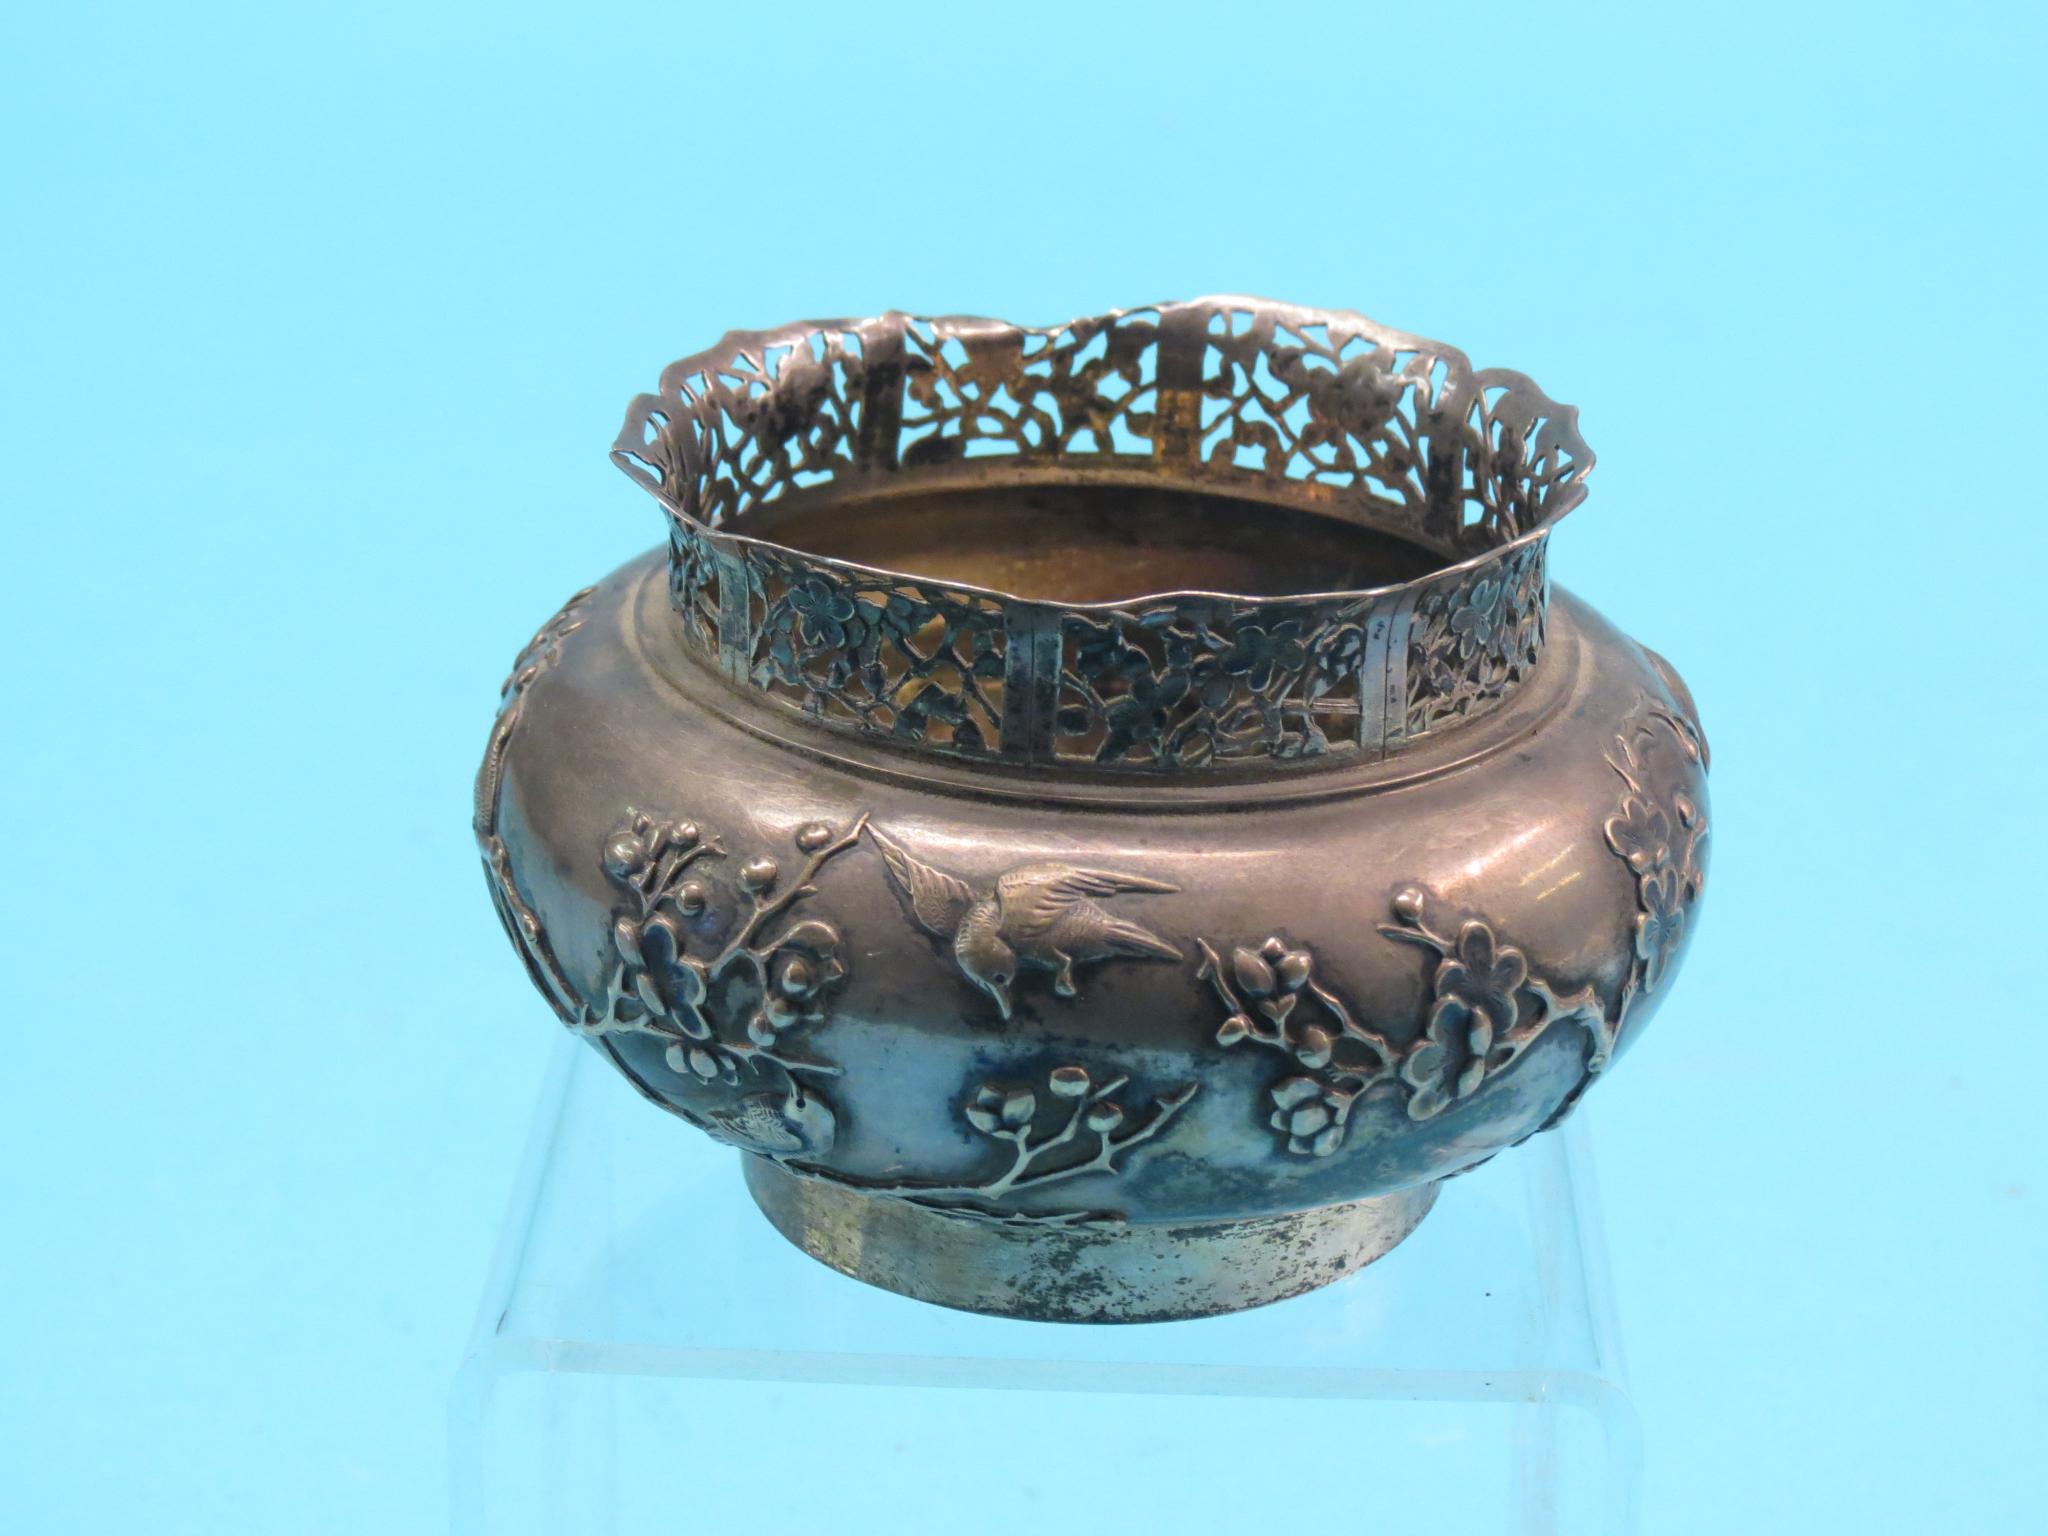 A Chinese silver bowl, cast with birds and foliage, 4.5in. diameter, an Indian silver posy vase - Image 4 of 6